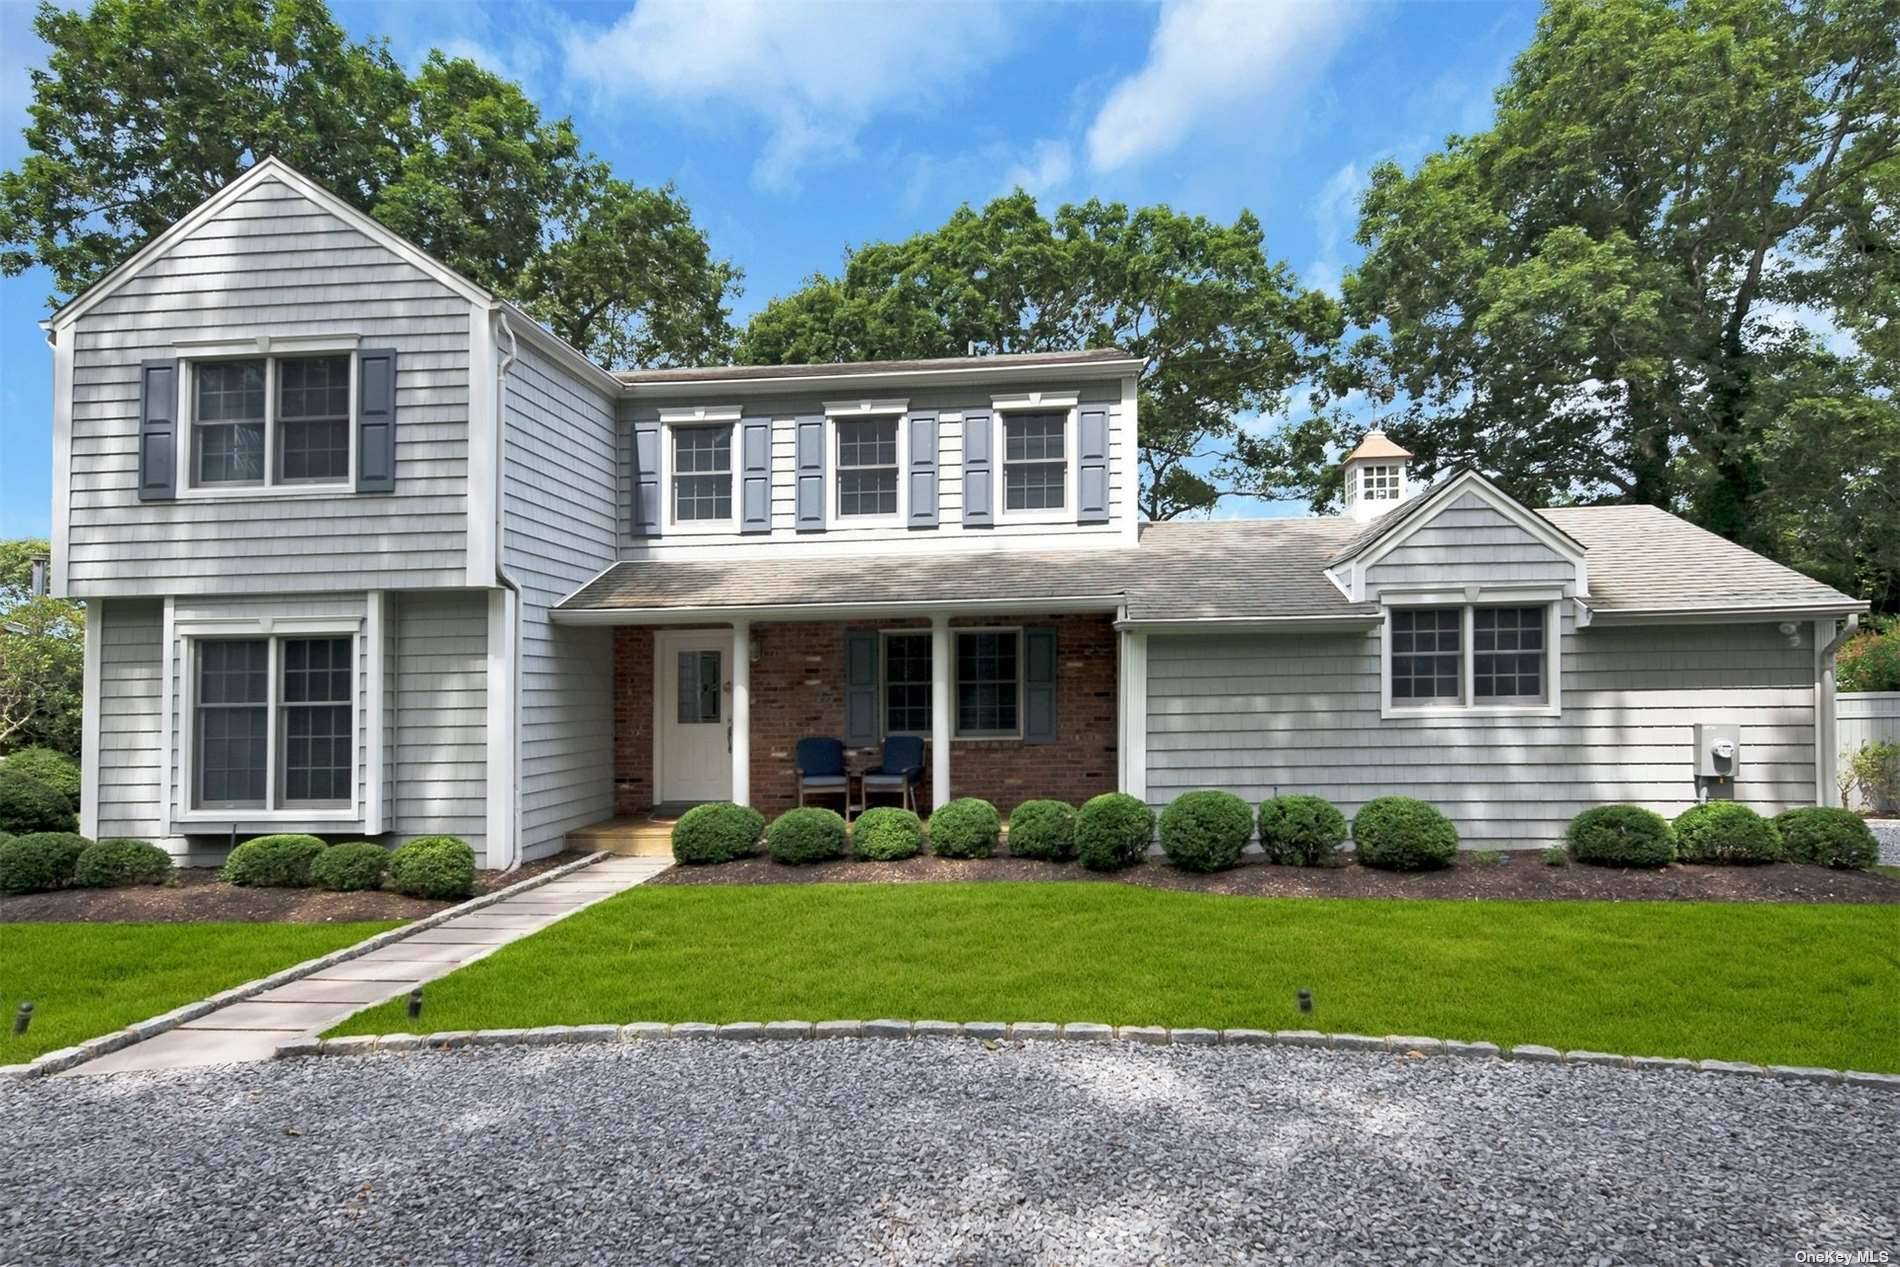 Impeccable five bedroom Colonial in Old Harbor.